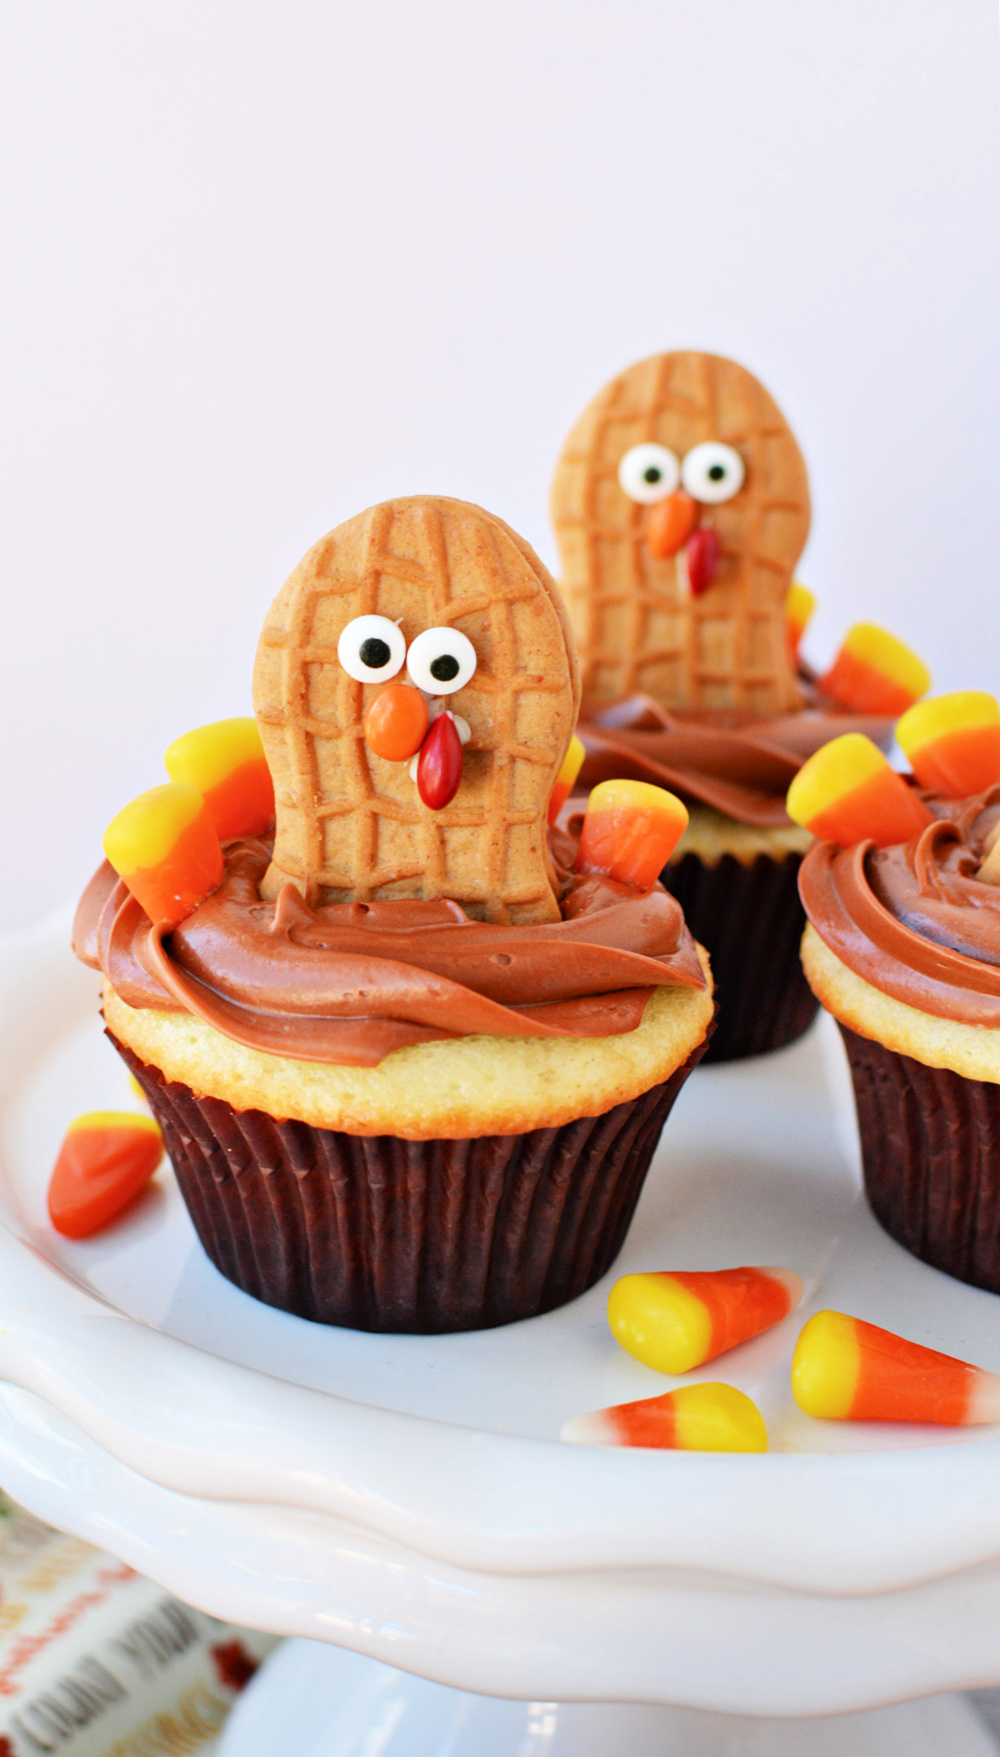 Vanilla cupcakes with chocolate frosting and Nutter Butter cookies decorated like Turkeys with candy corns